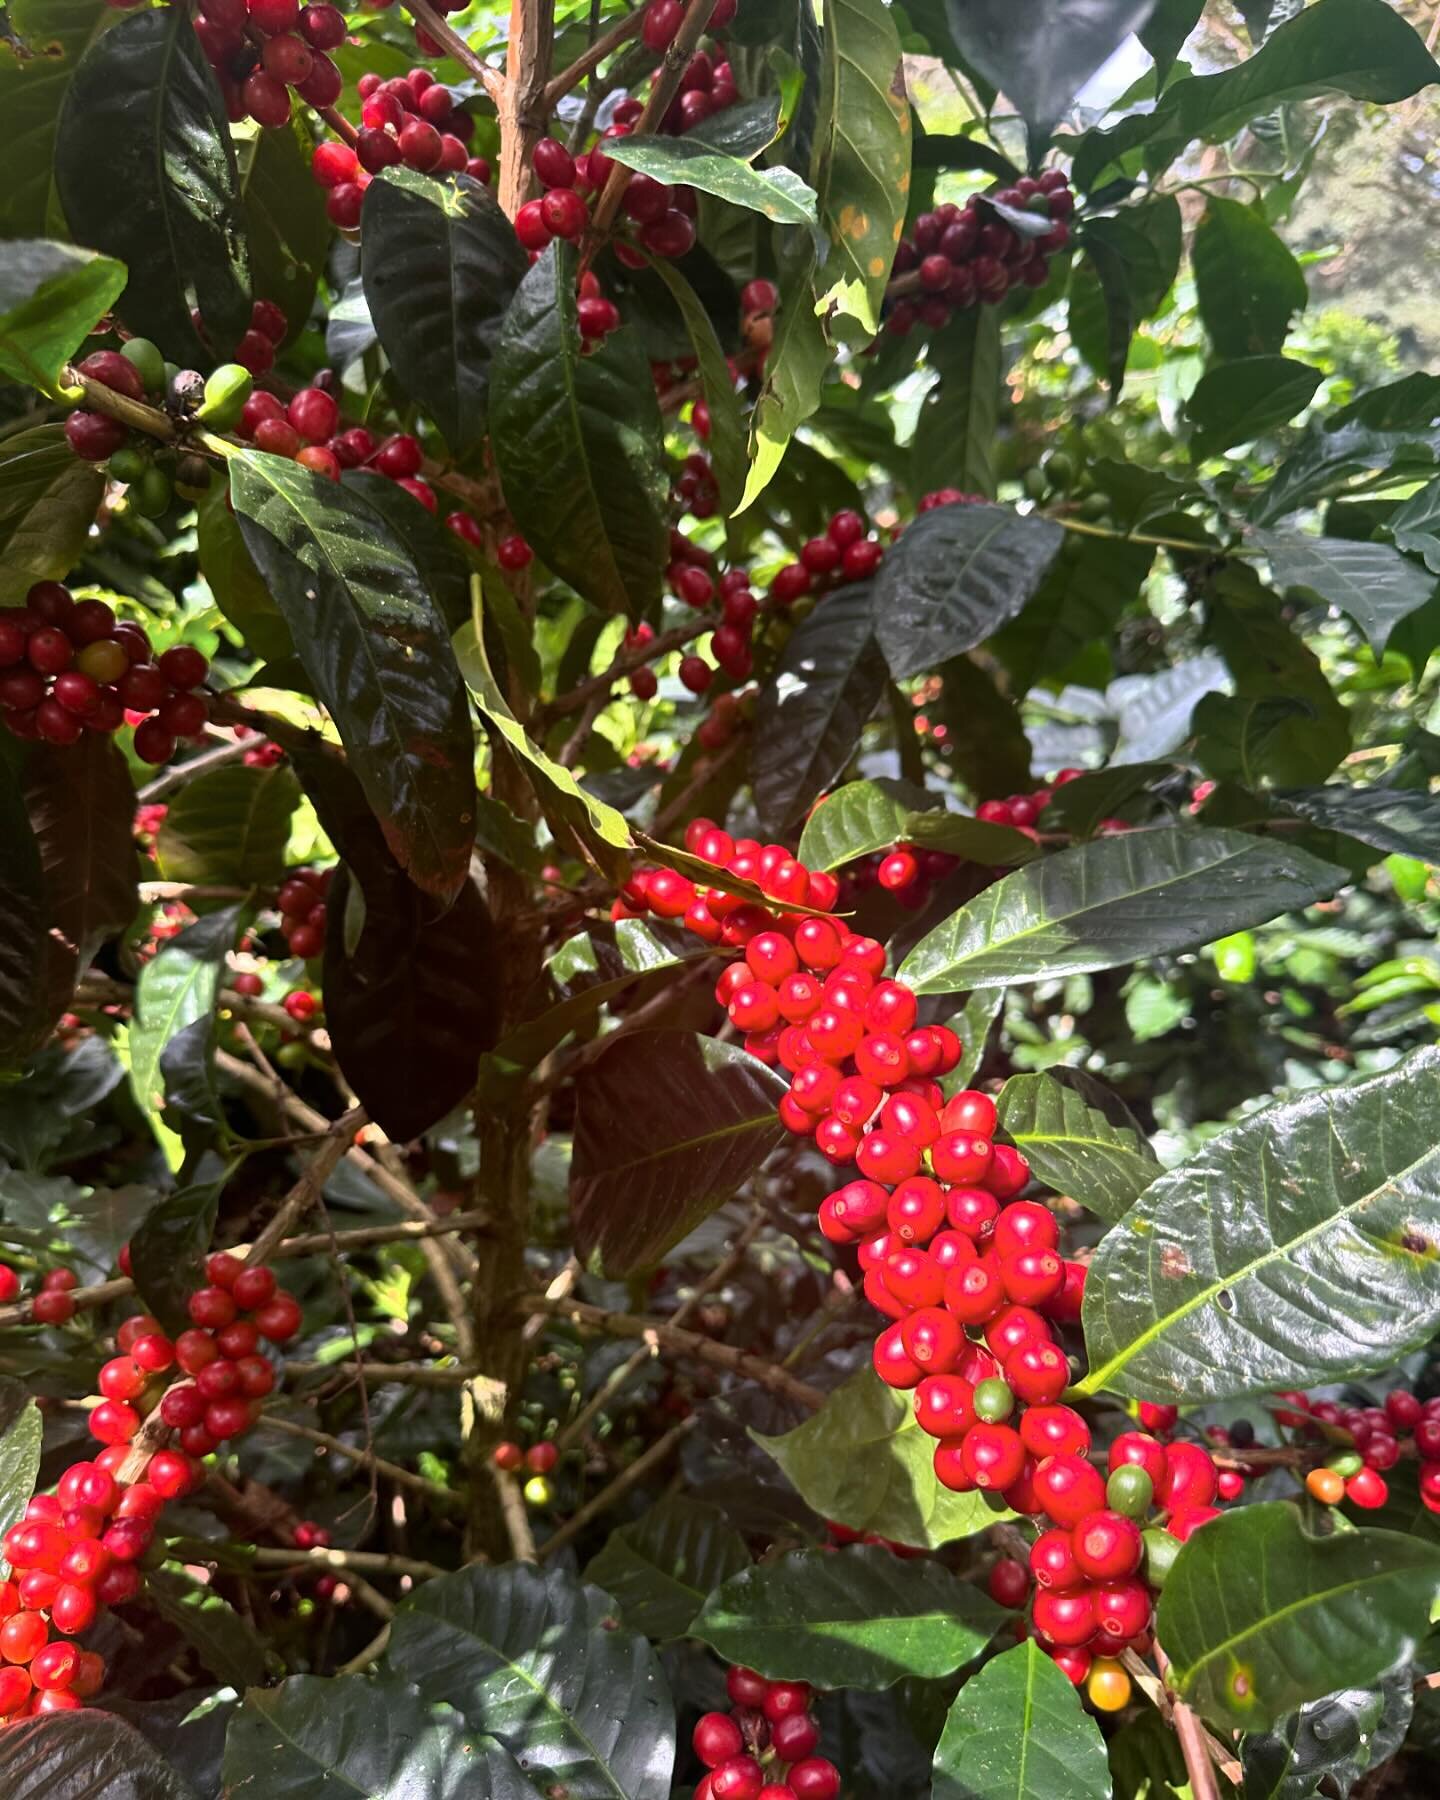 Did you know a coffee bean is actually a seed in a coffee cherry? The ideal microclimates and elevation in Boquete, Panam&aacute; slows the maturation of these cherries, imparting a natural sweetness to the coffee &ldquo;bean.&rdquo; This picture is 